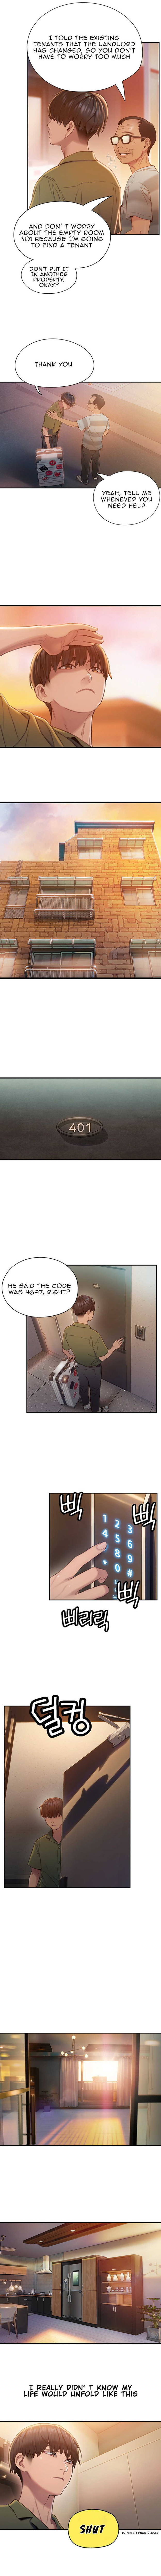 [Park Hyeongjun] Love Limit Exceeded (01-09) (Ongoing) - Page 5